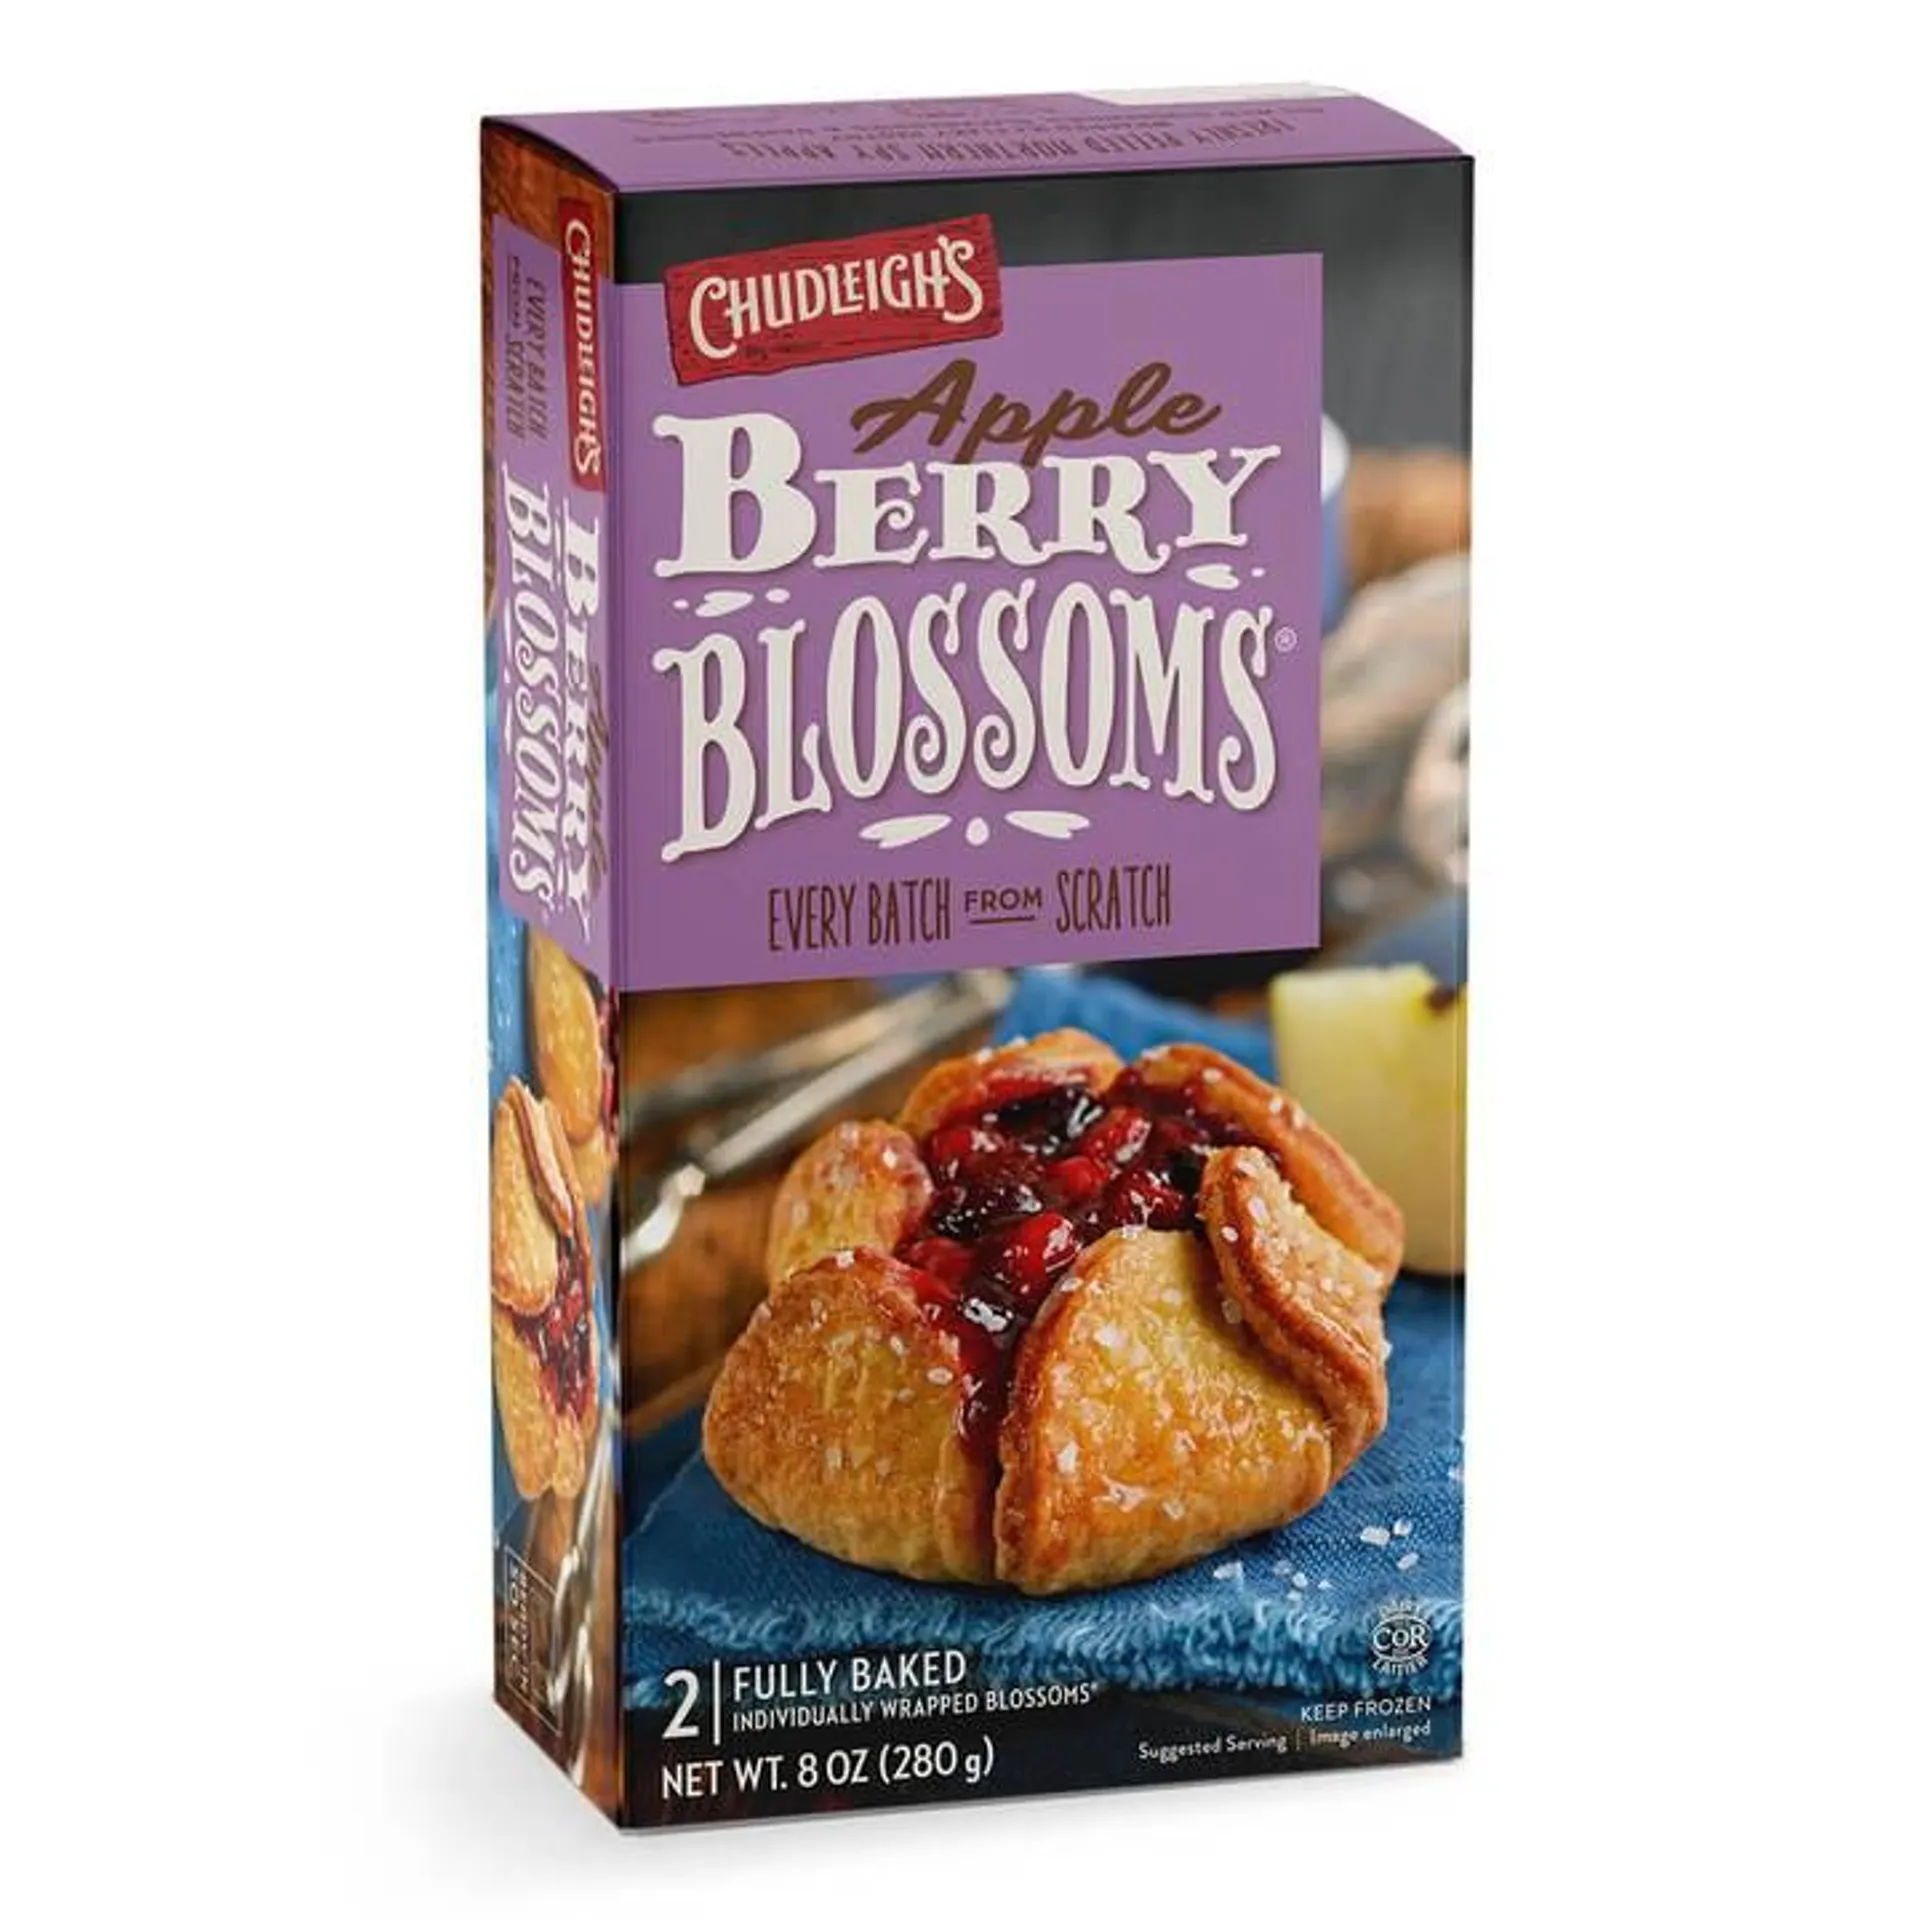 Chudleigh's Apple Berry Blossoms - 2 pack